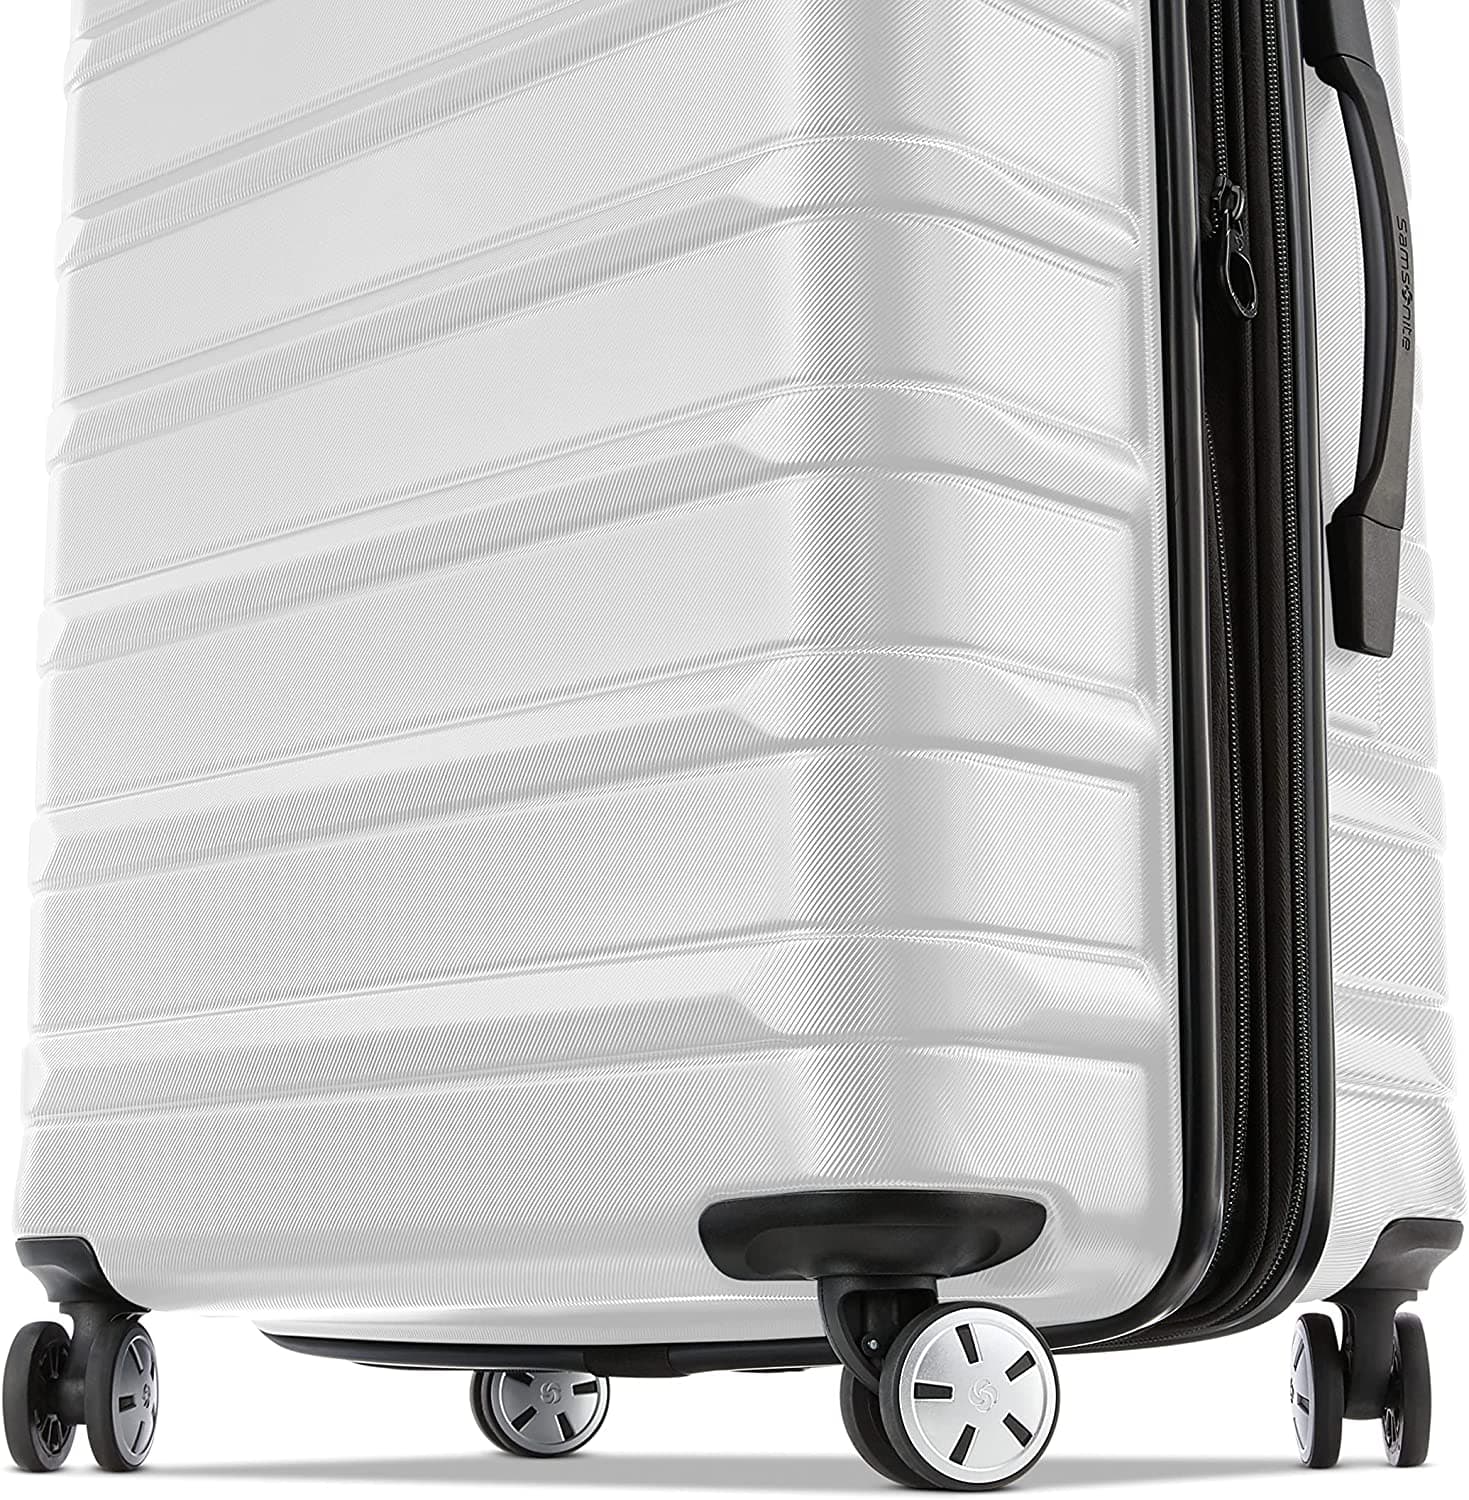 Samsonite Omni 2 Hardside Expandable 2-piece Luggage Set with Spinners ...